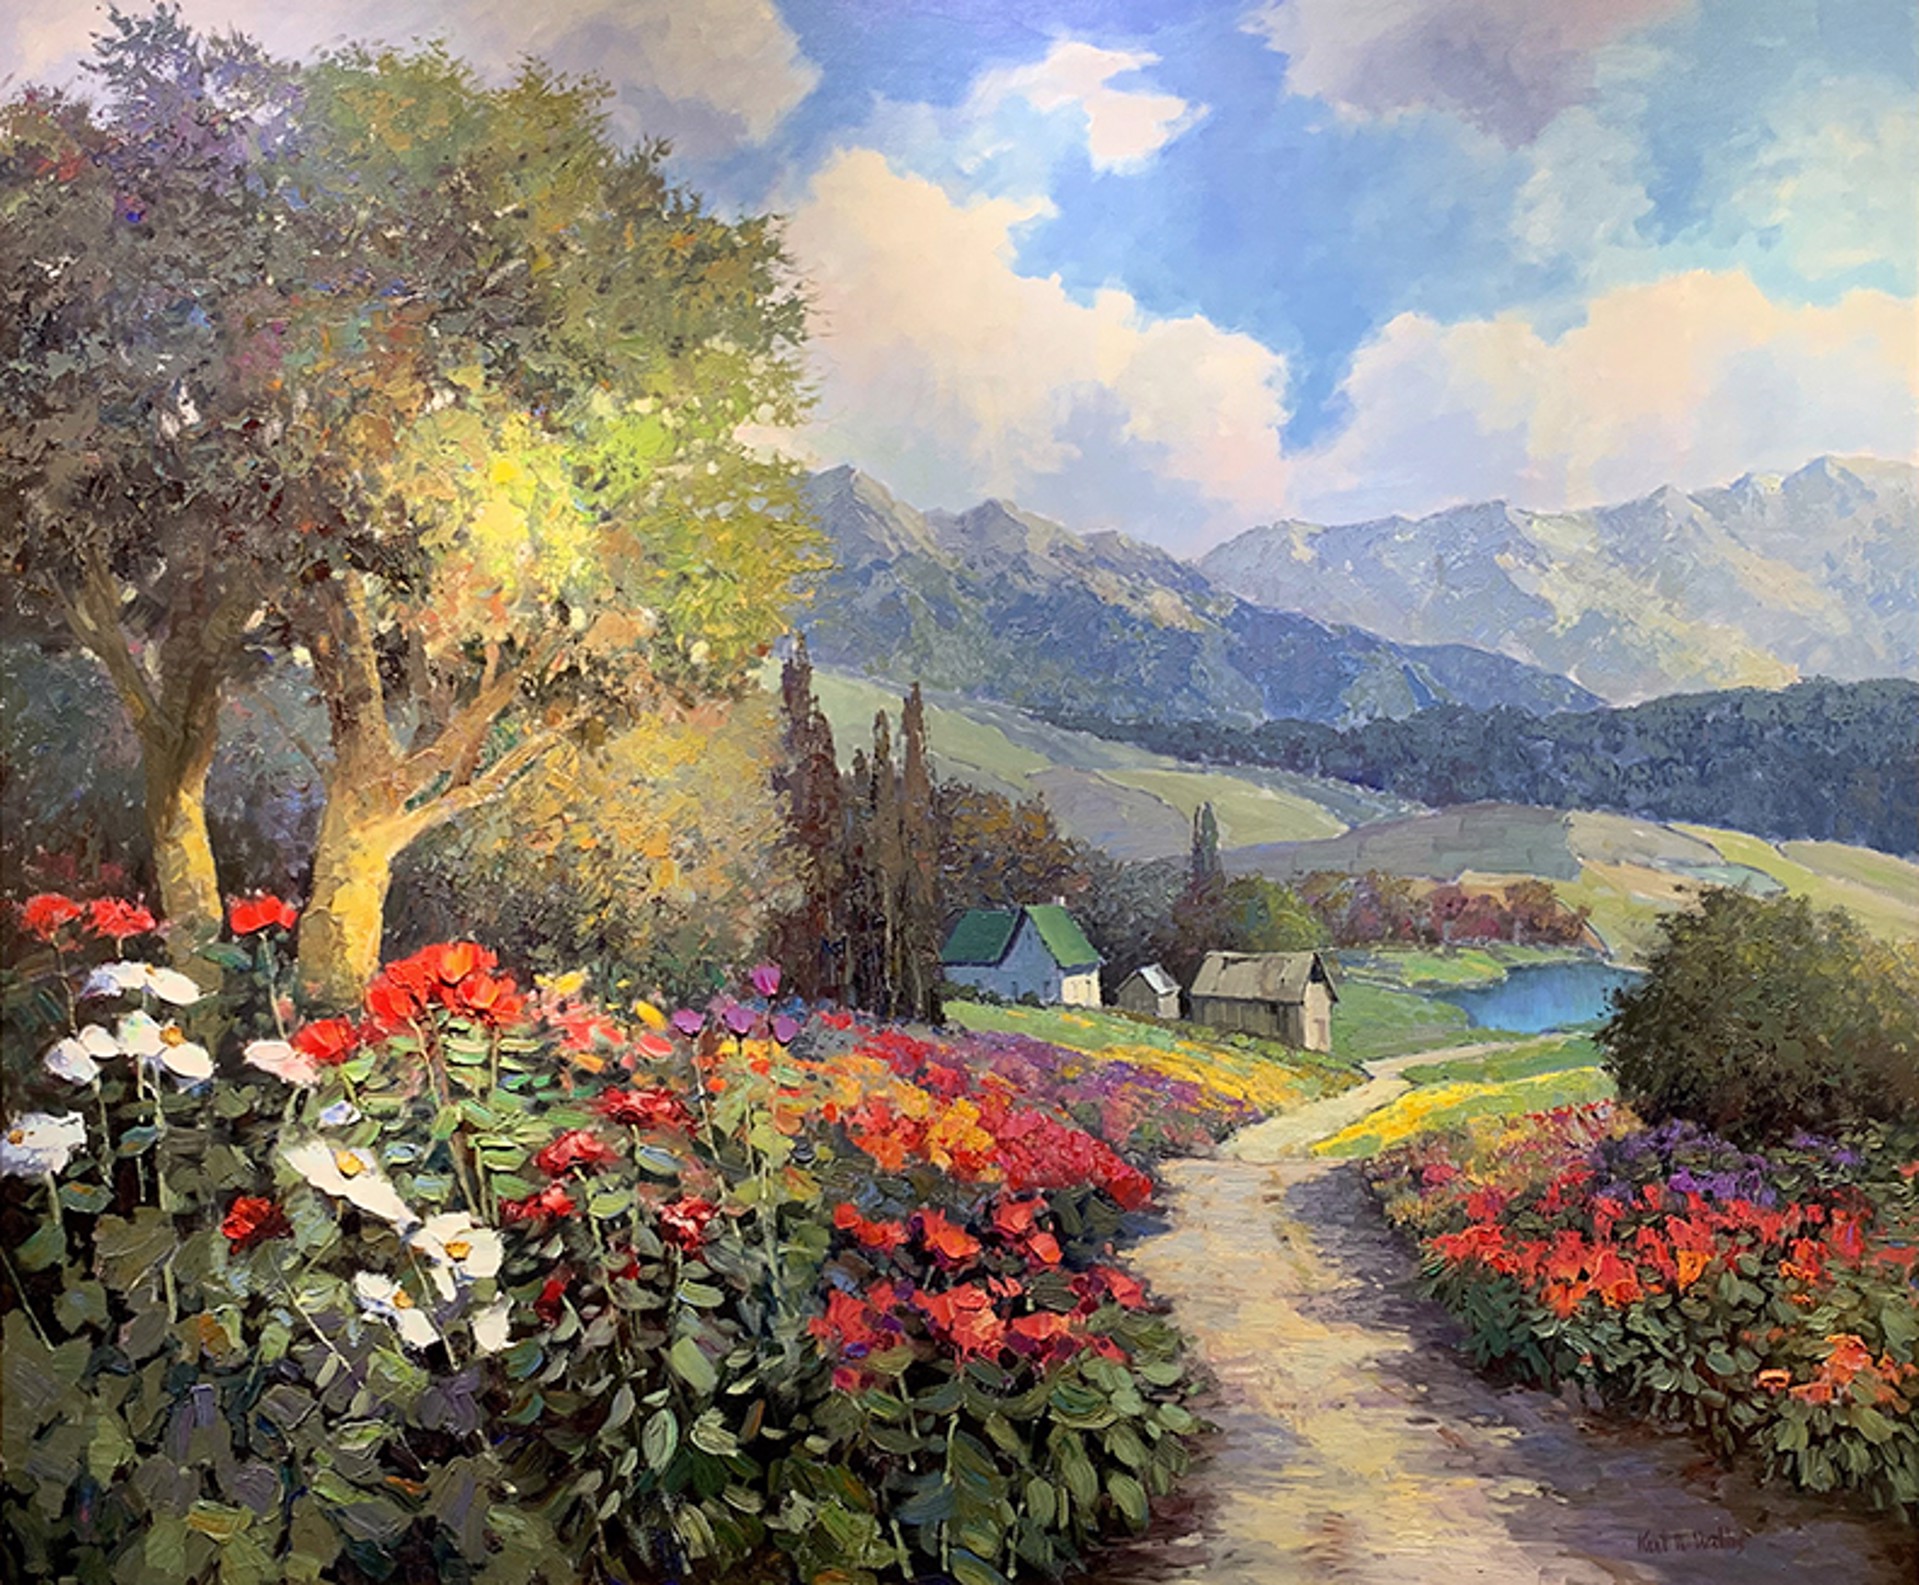 High in the Mountains by Kent R. Wallis